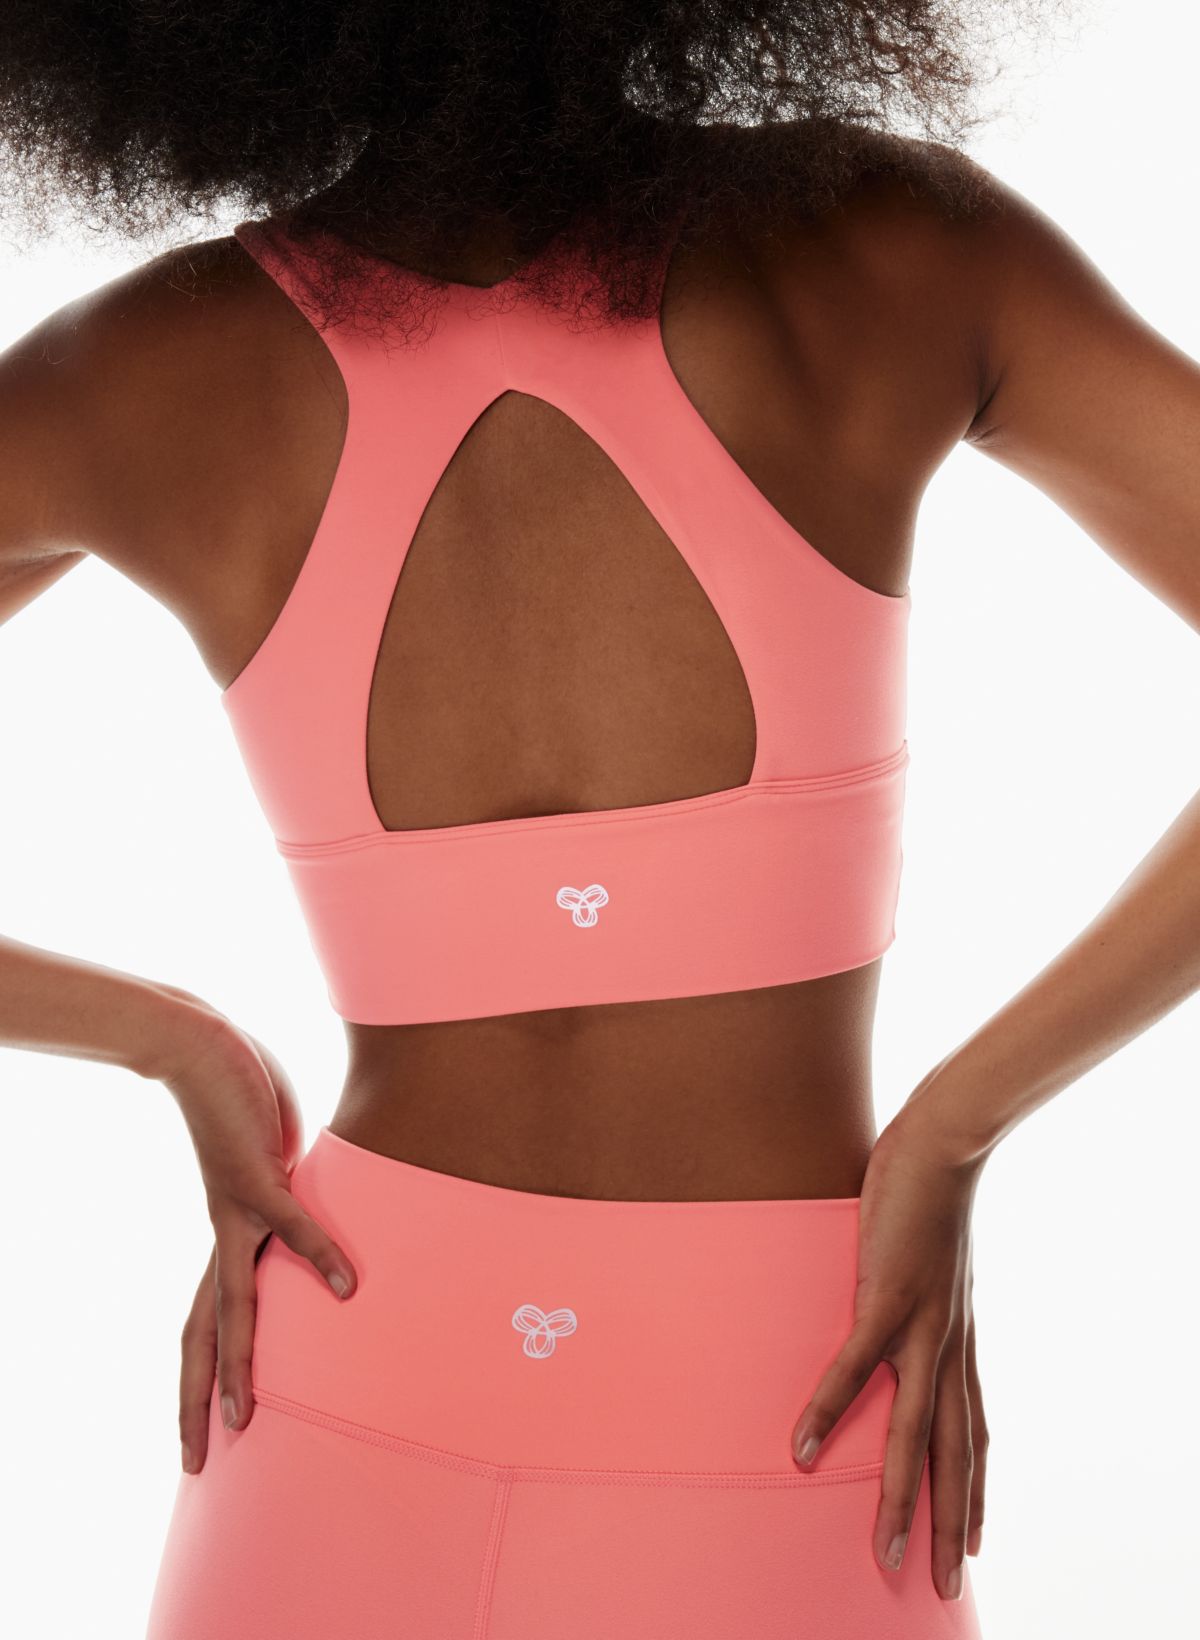 Wondering if anyone has bought this bra and can confirm if the colour  online is the same in person? Trying to find a bright red bra and have been  duped by inaccurate